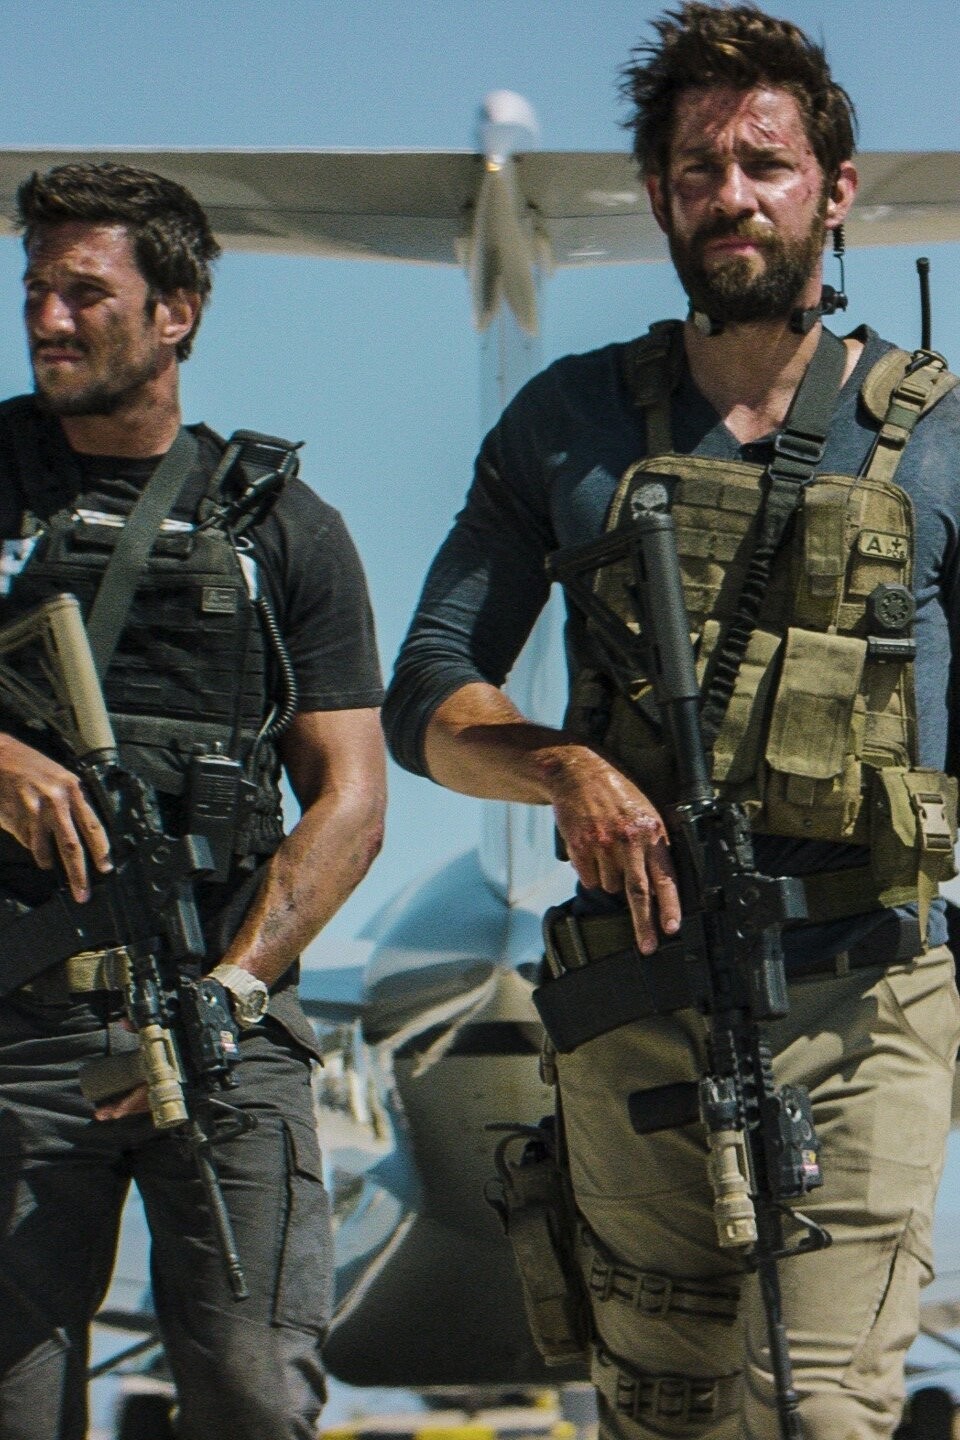 13 Hours: The Secret Soldiers of Benghazi - Rotten Tomatoes